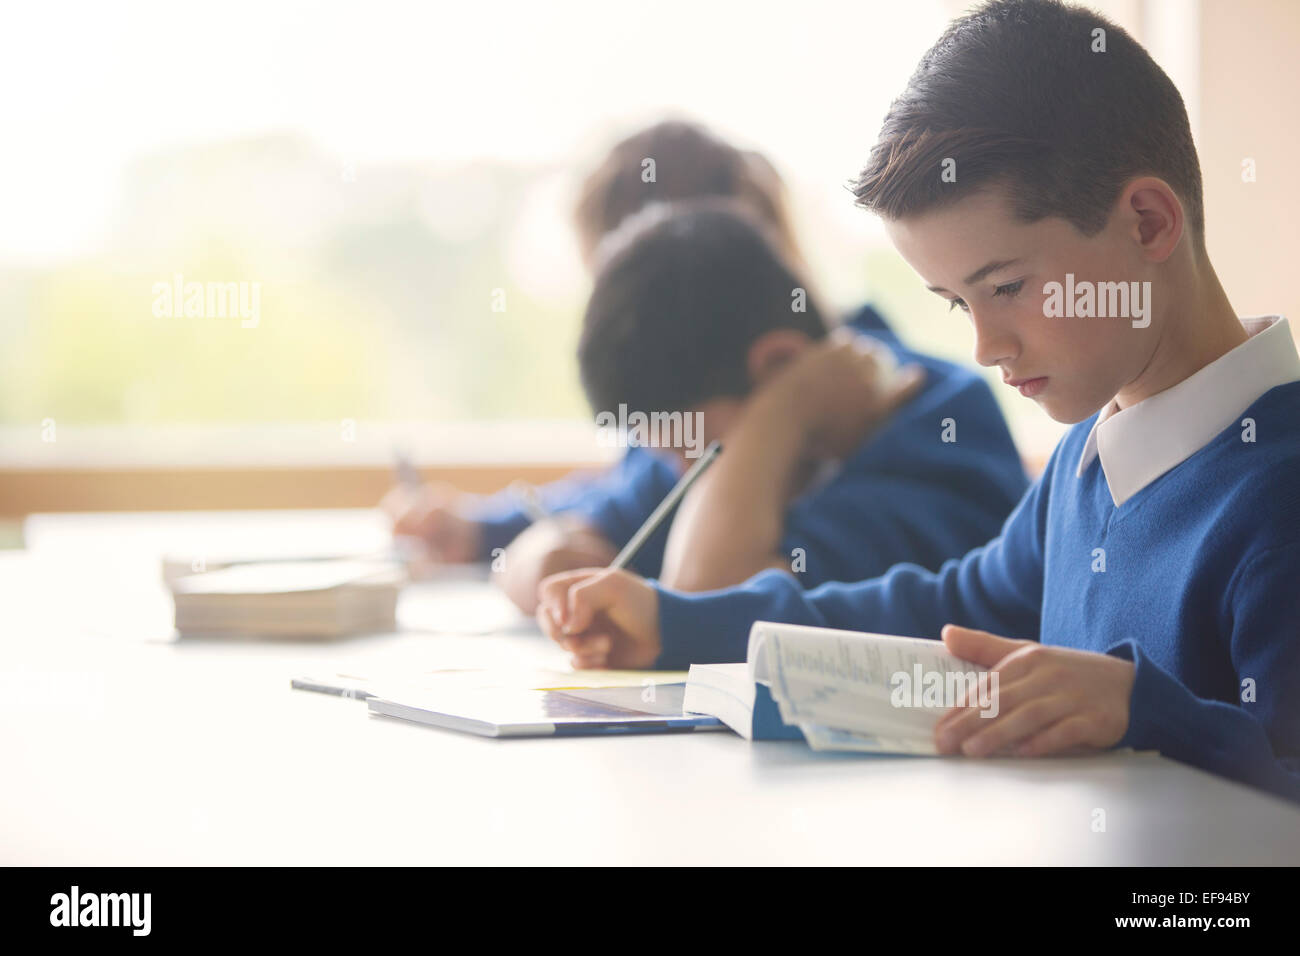 Pupil learning in classroom using book and tablet pc Stock Photo